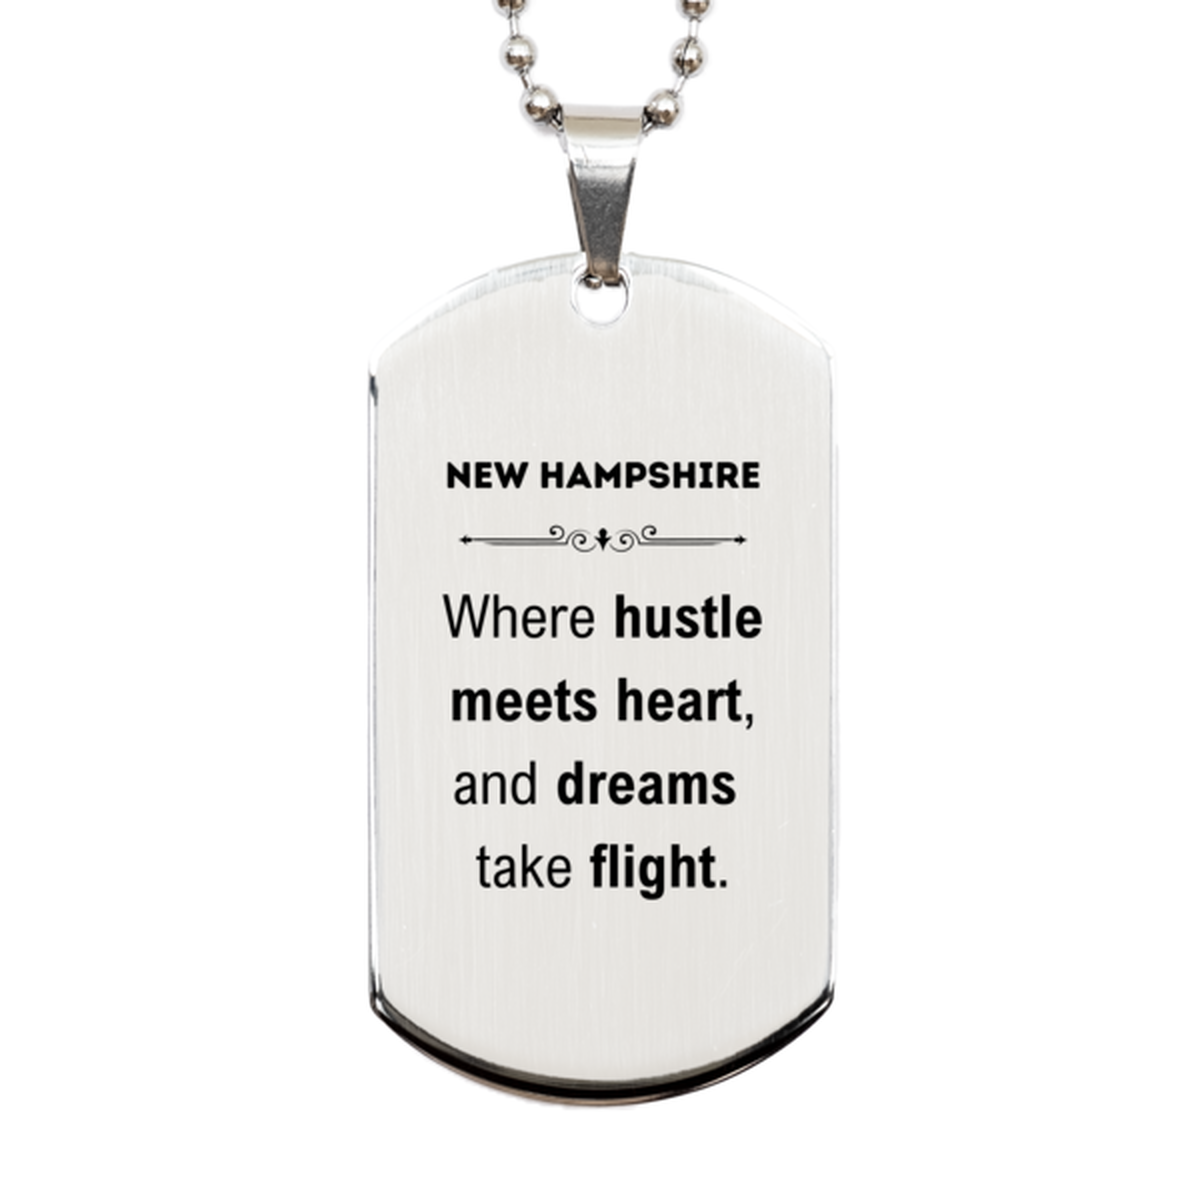 New Hampshire: Where hustle meets heart, and dreams take flight, New Hampshire Gifts, Proud New Hampshire Christmas Birthday New Hampshire Silver Dog Tag, New Hampshire State People, Men, Women, Friends